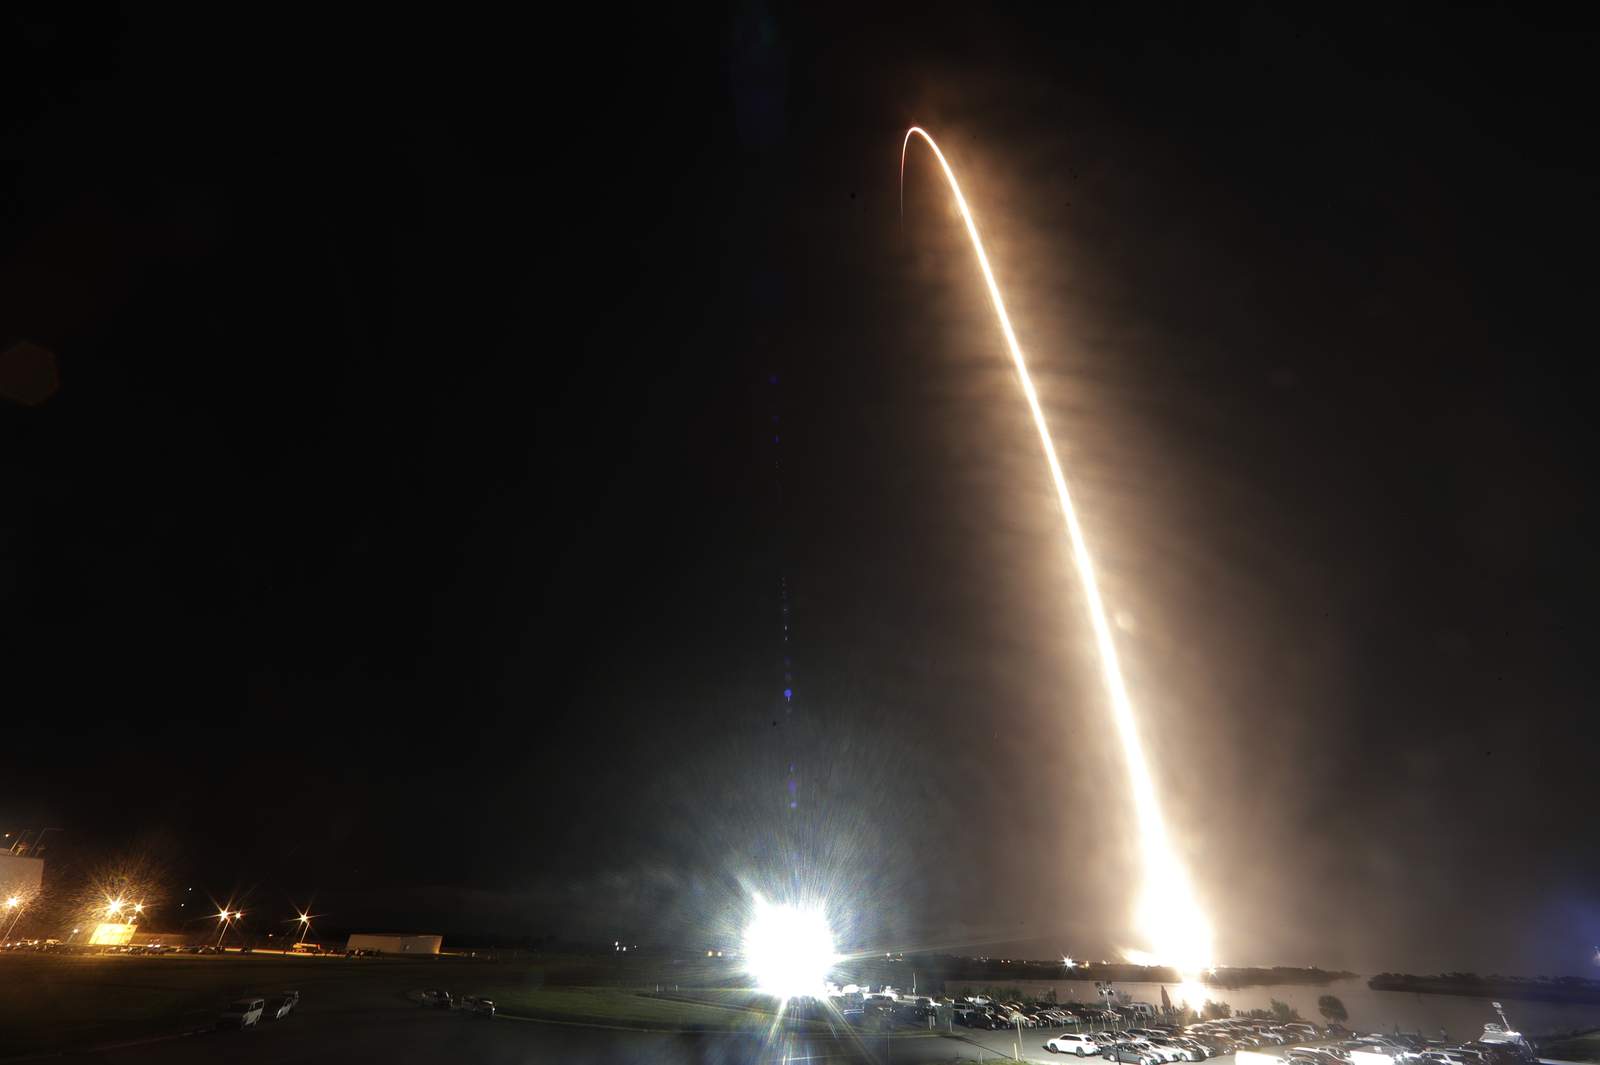 Liftoff! SpaceX launches 4 astronauts on 6-month journey